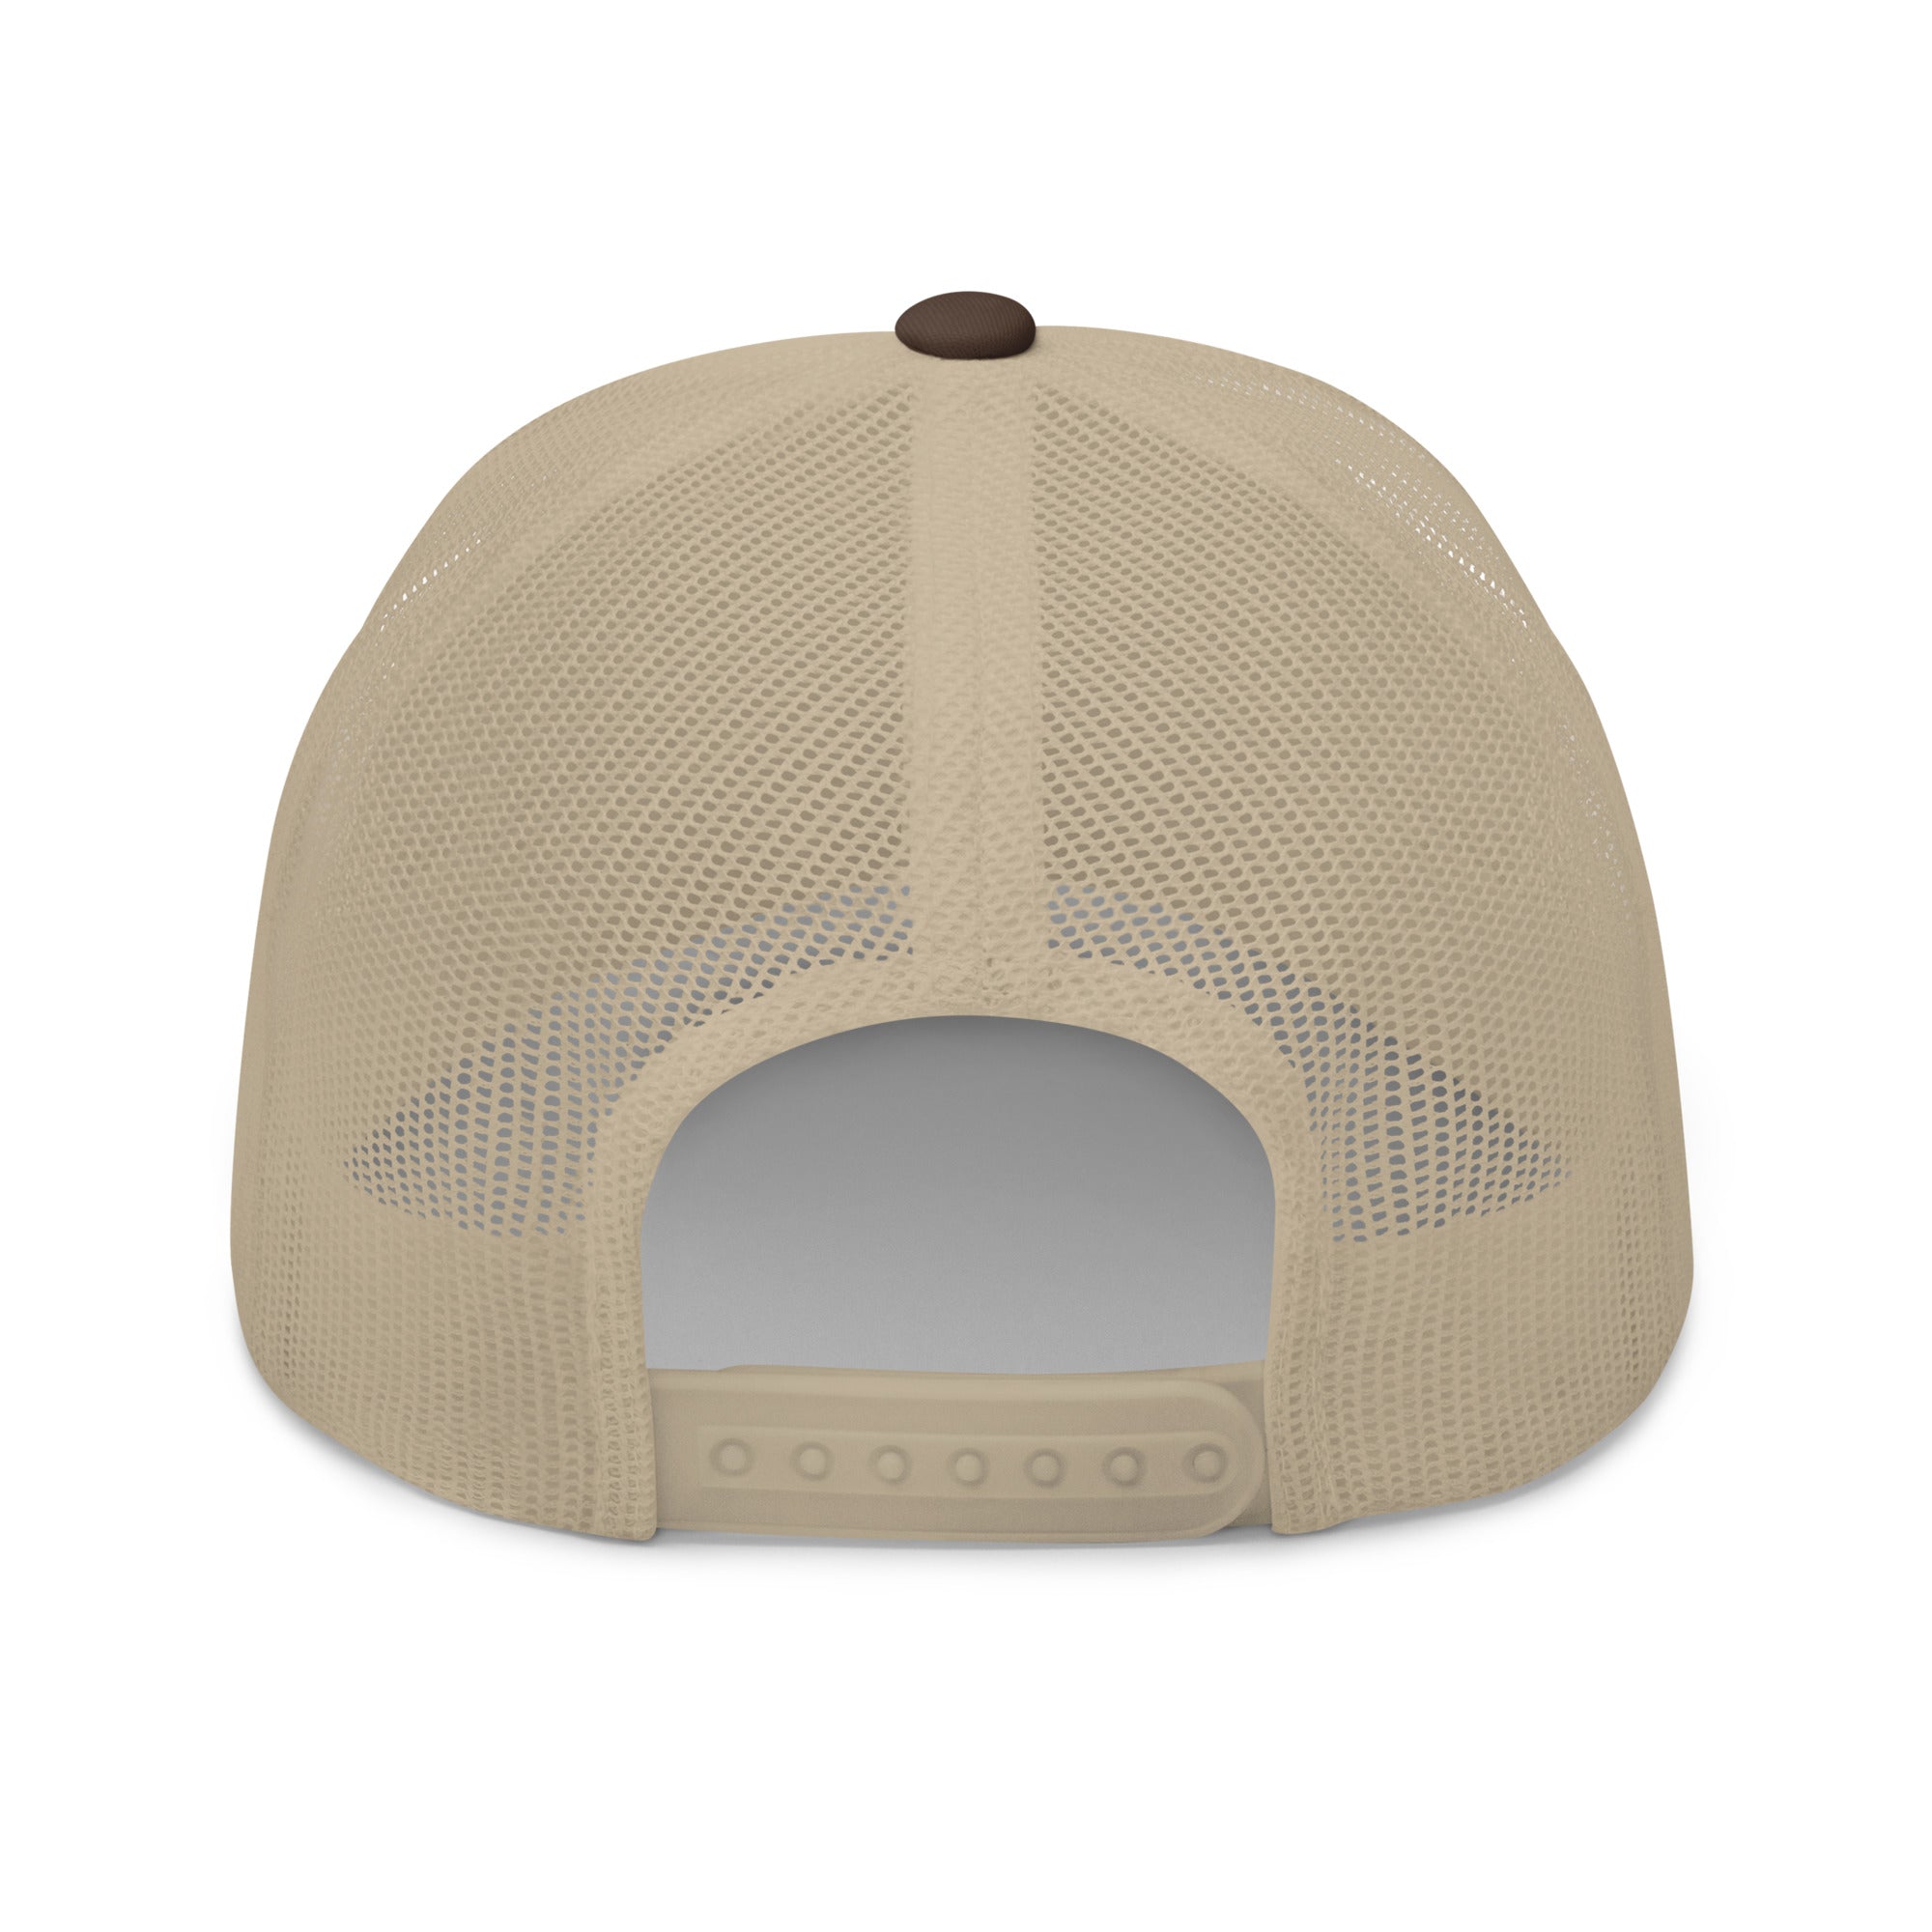 Bitcoin Accessories - The Bitcoin Est. 2009 Trucker Hat has mesh back panels and a snapback closure. Back view.